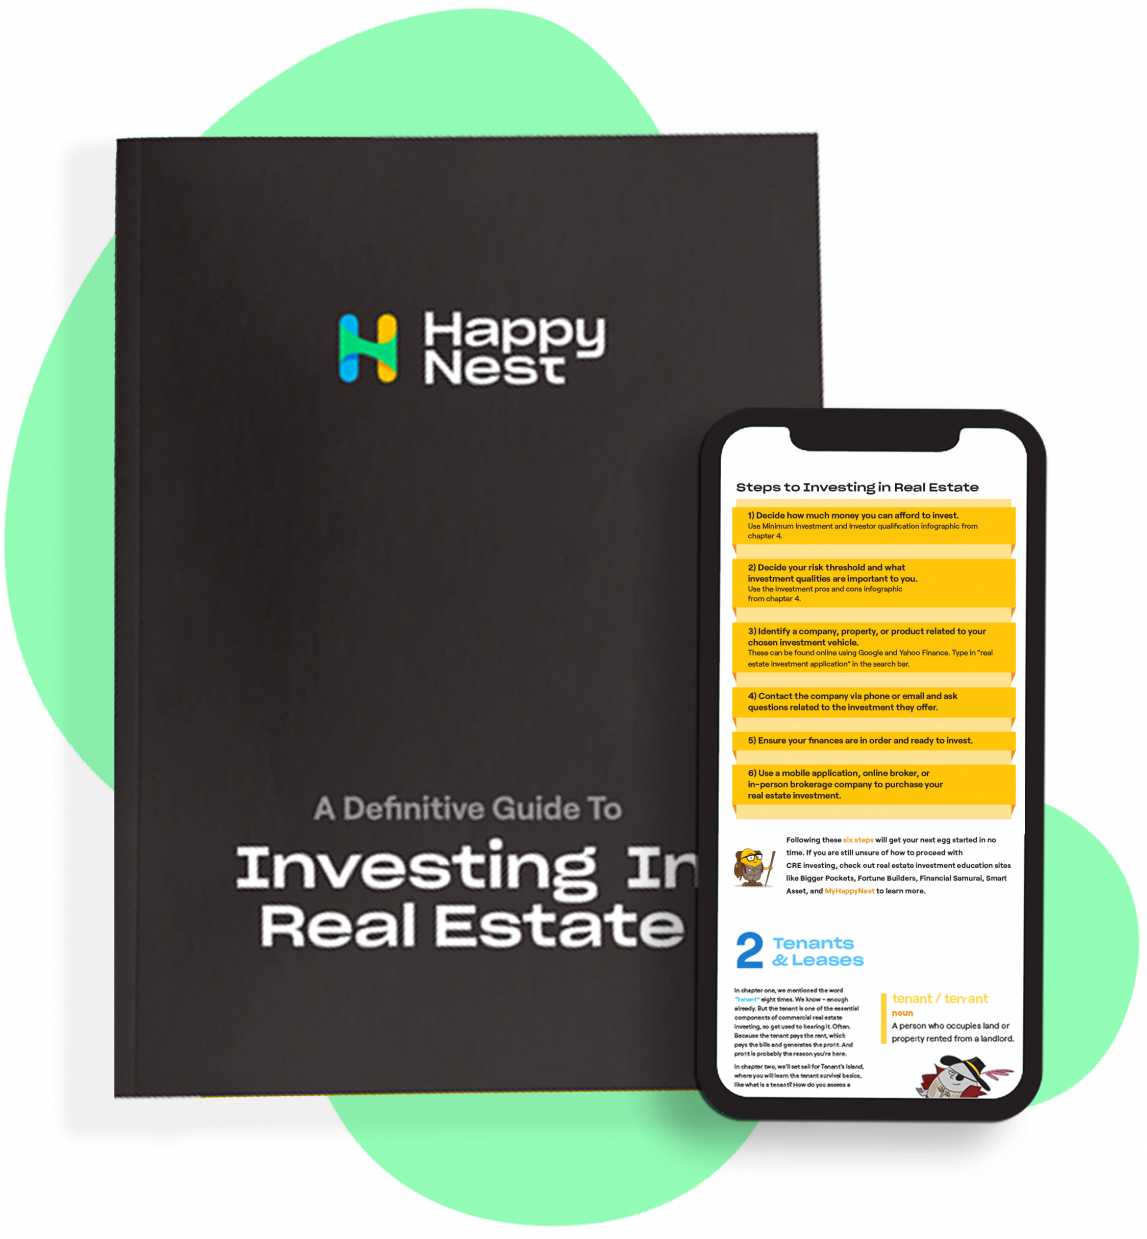 A definitive guide to real estate investing